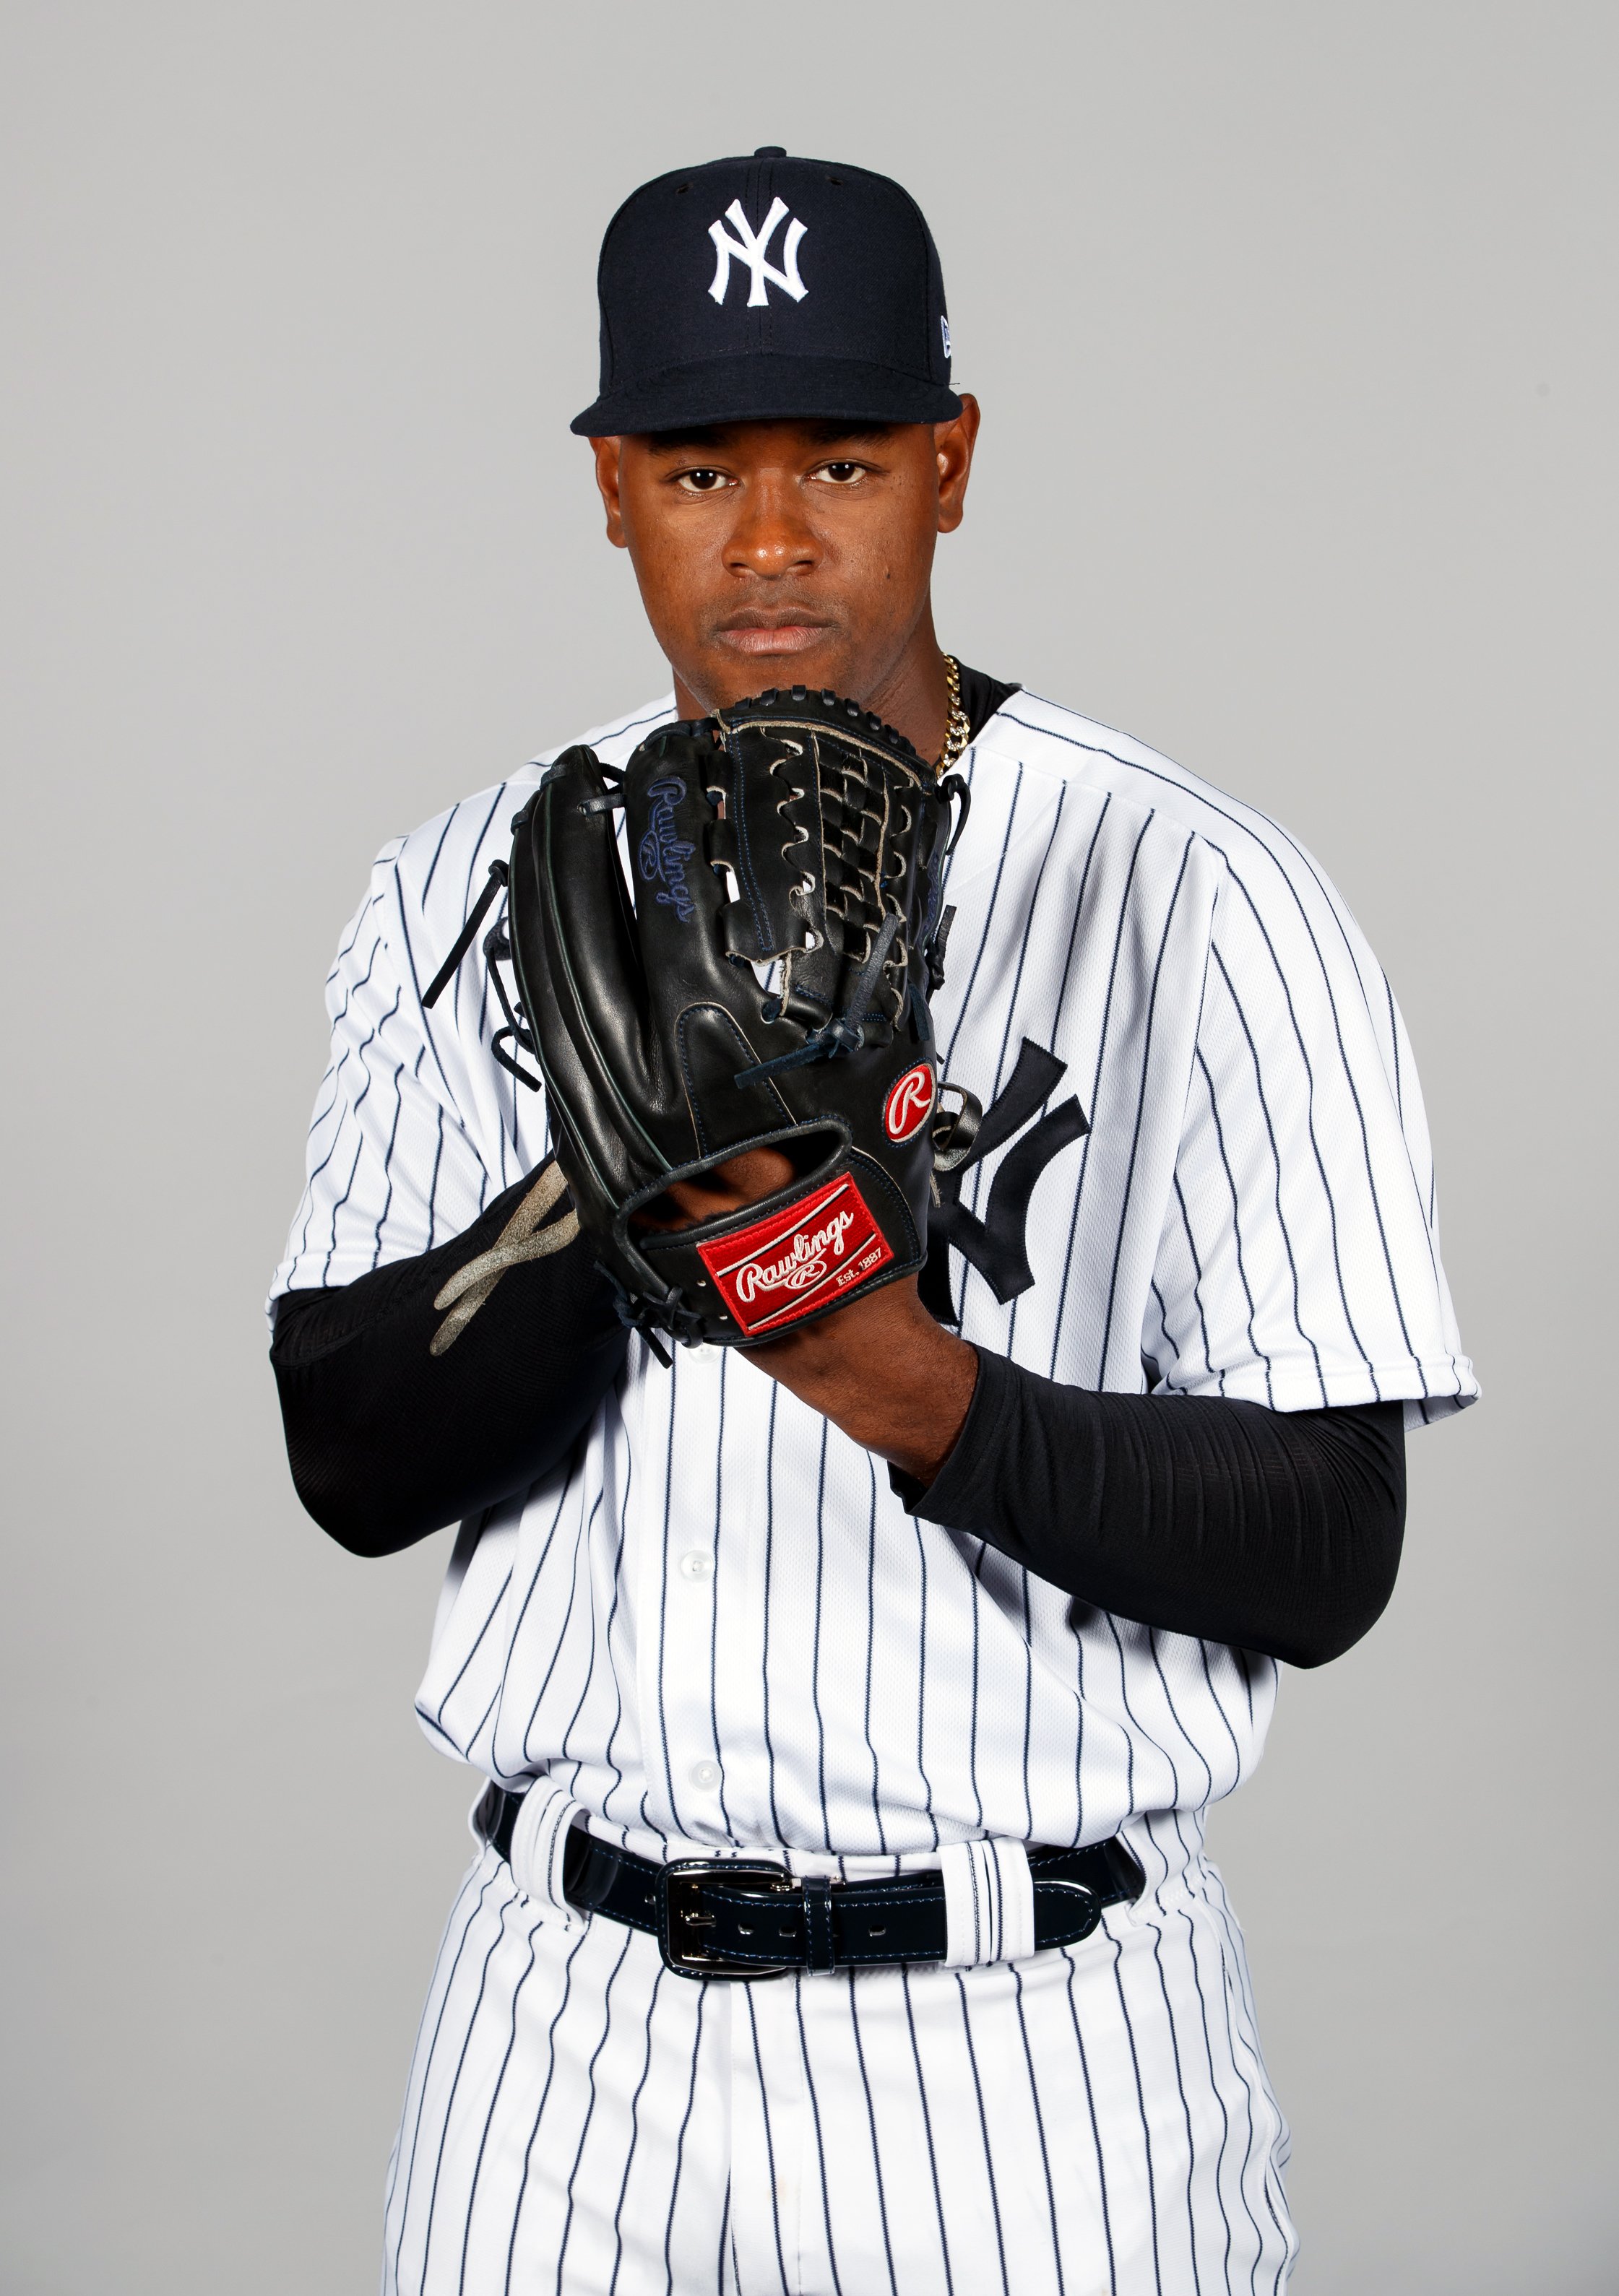 Luis Severino #40 of the New York Yankees poses during Photo Day on Thursday, February 20, 2020 | Photo: Getty Images